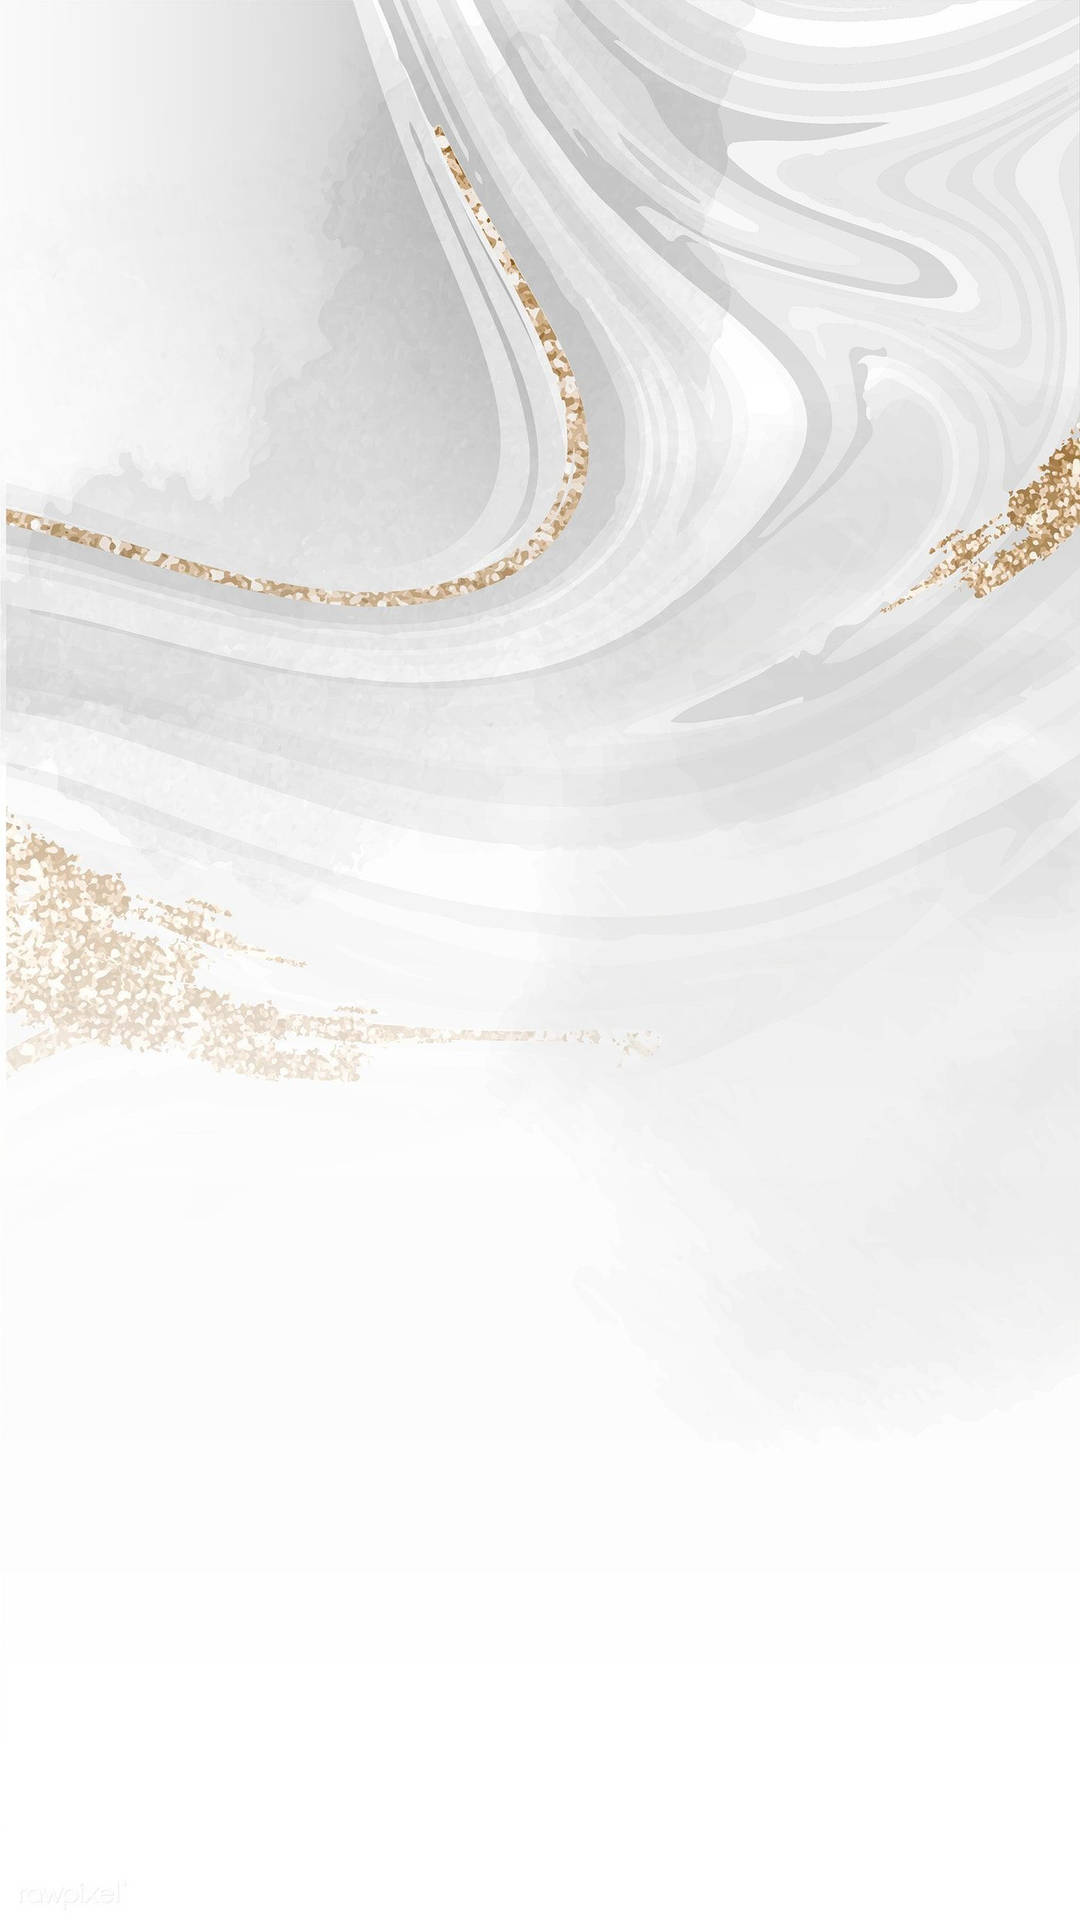 Flowing White And Gold Background